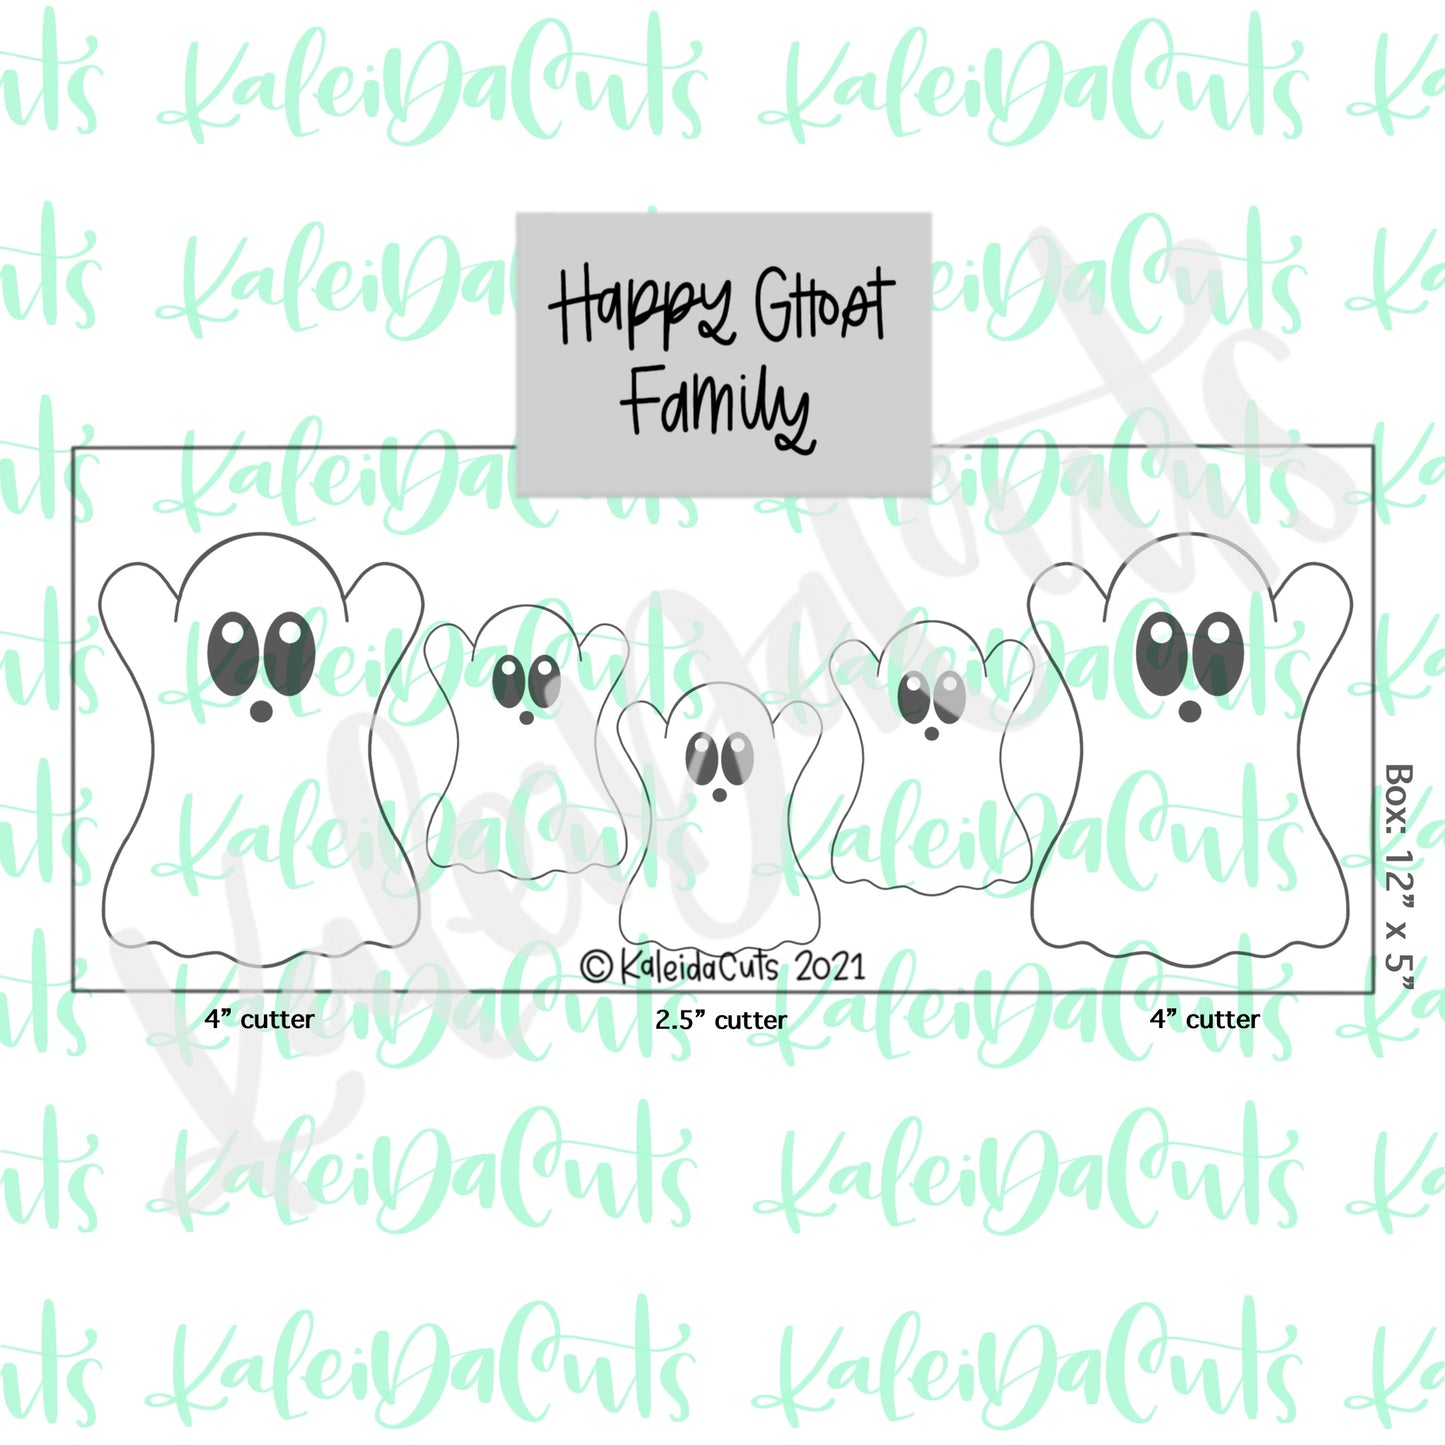 Happy Ghost Cookie Cutter